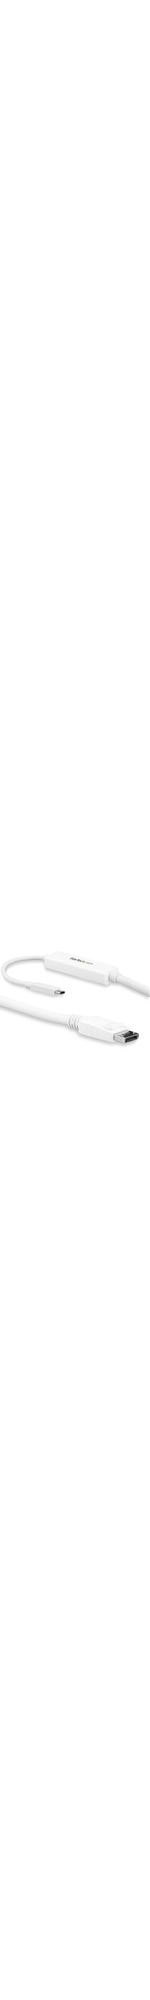 StarTech.com 3m / 10 ft USB C to DisplayPort Cable - USB-C to DP Cable - 4K 60Hz - White - 9.8 ft. USB C to DisplayPort cable and adapter in-one- 4K DisplayPort cabl